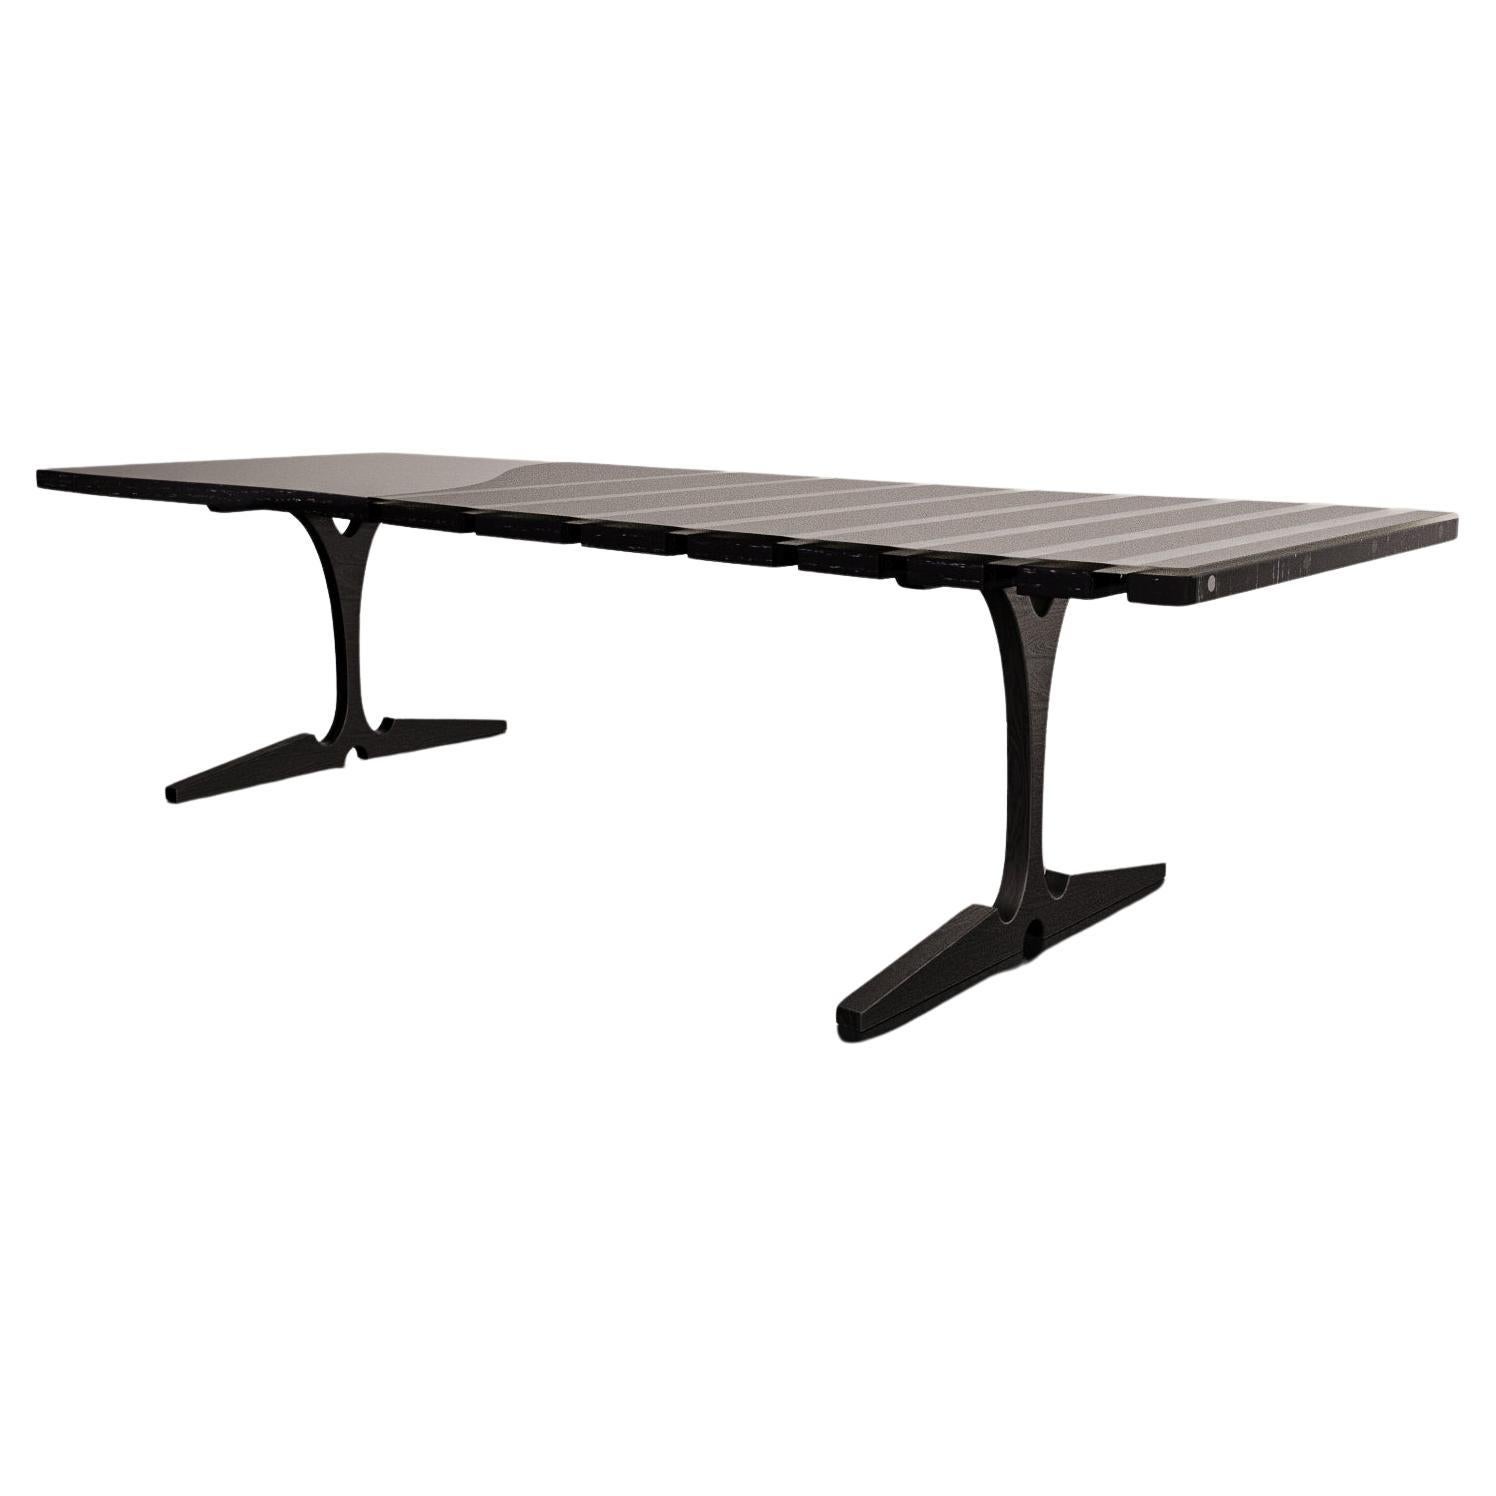 "Garni" Dining table by Christopher Mark For Sale